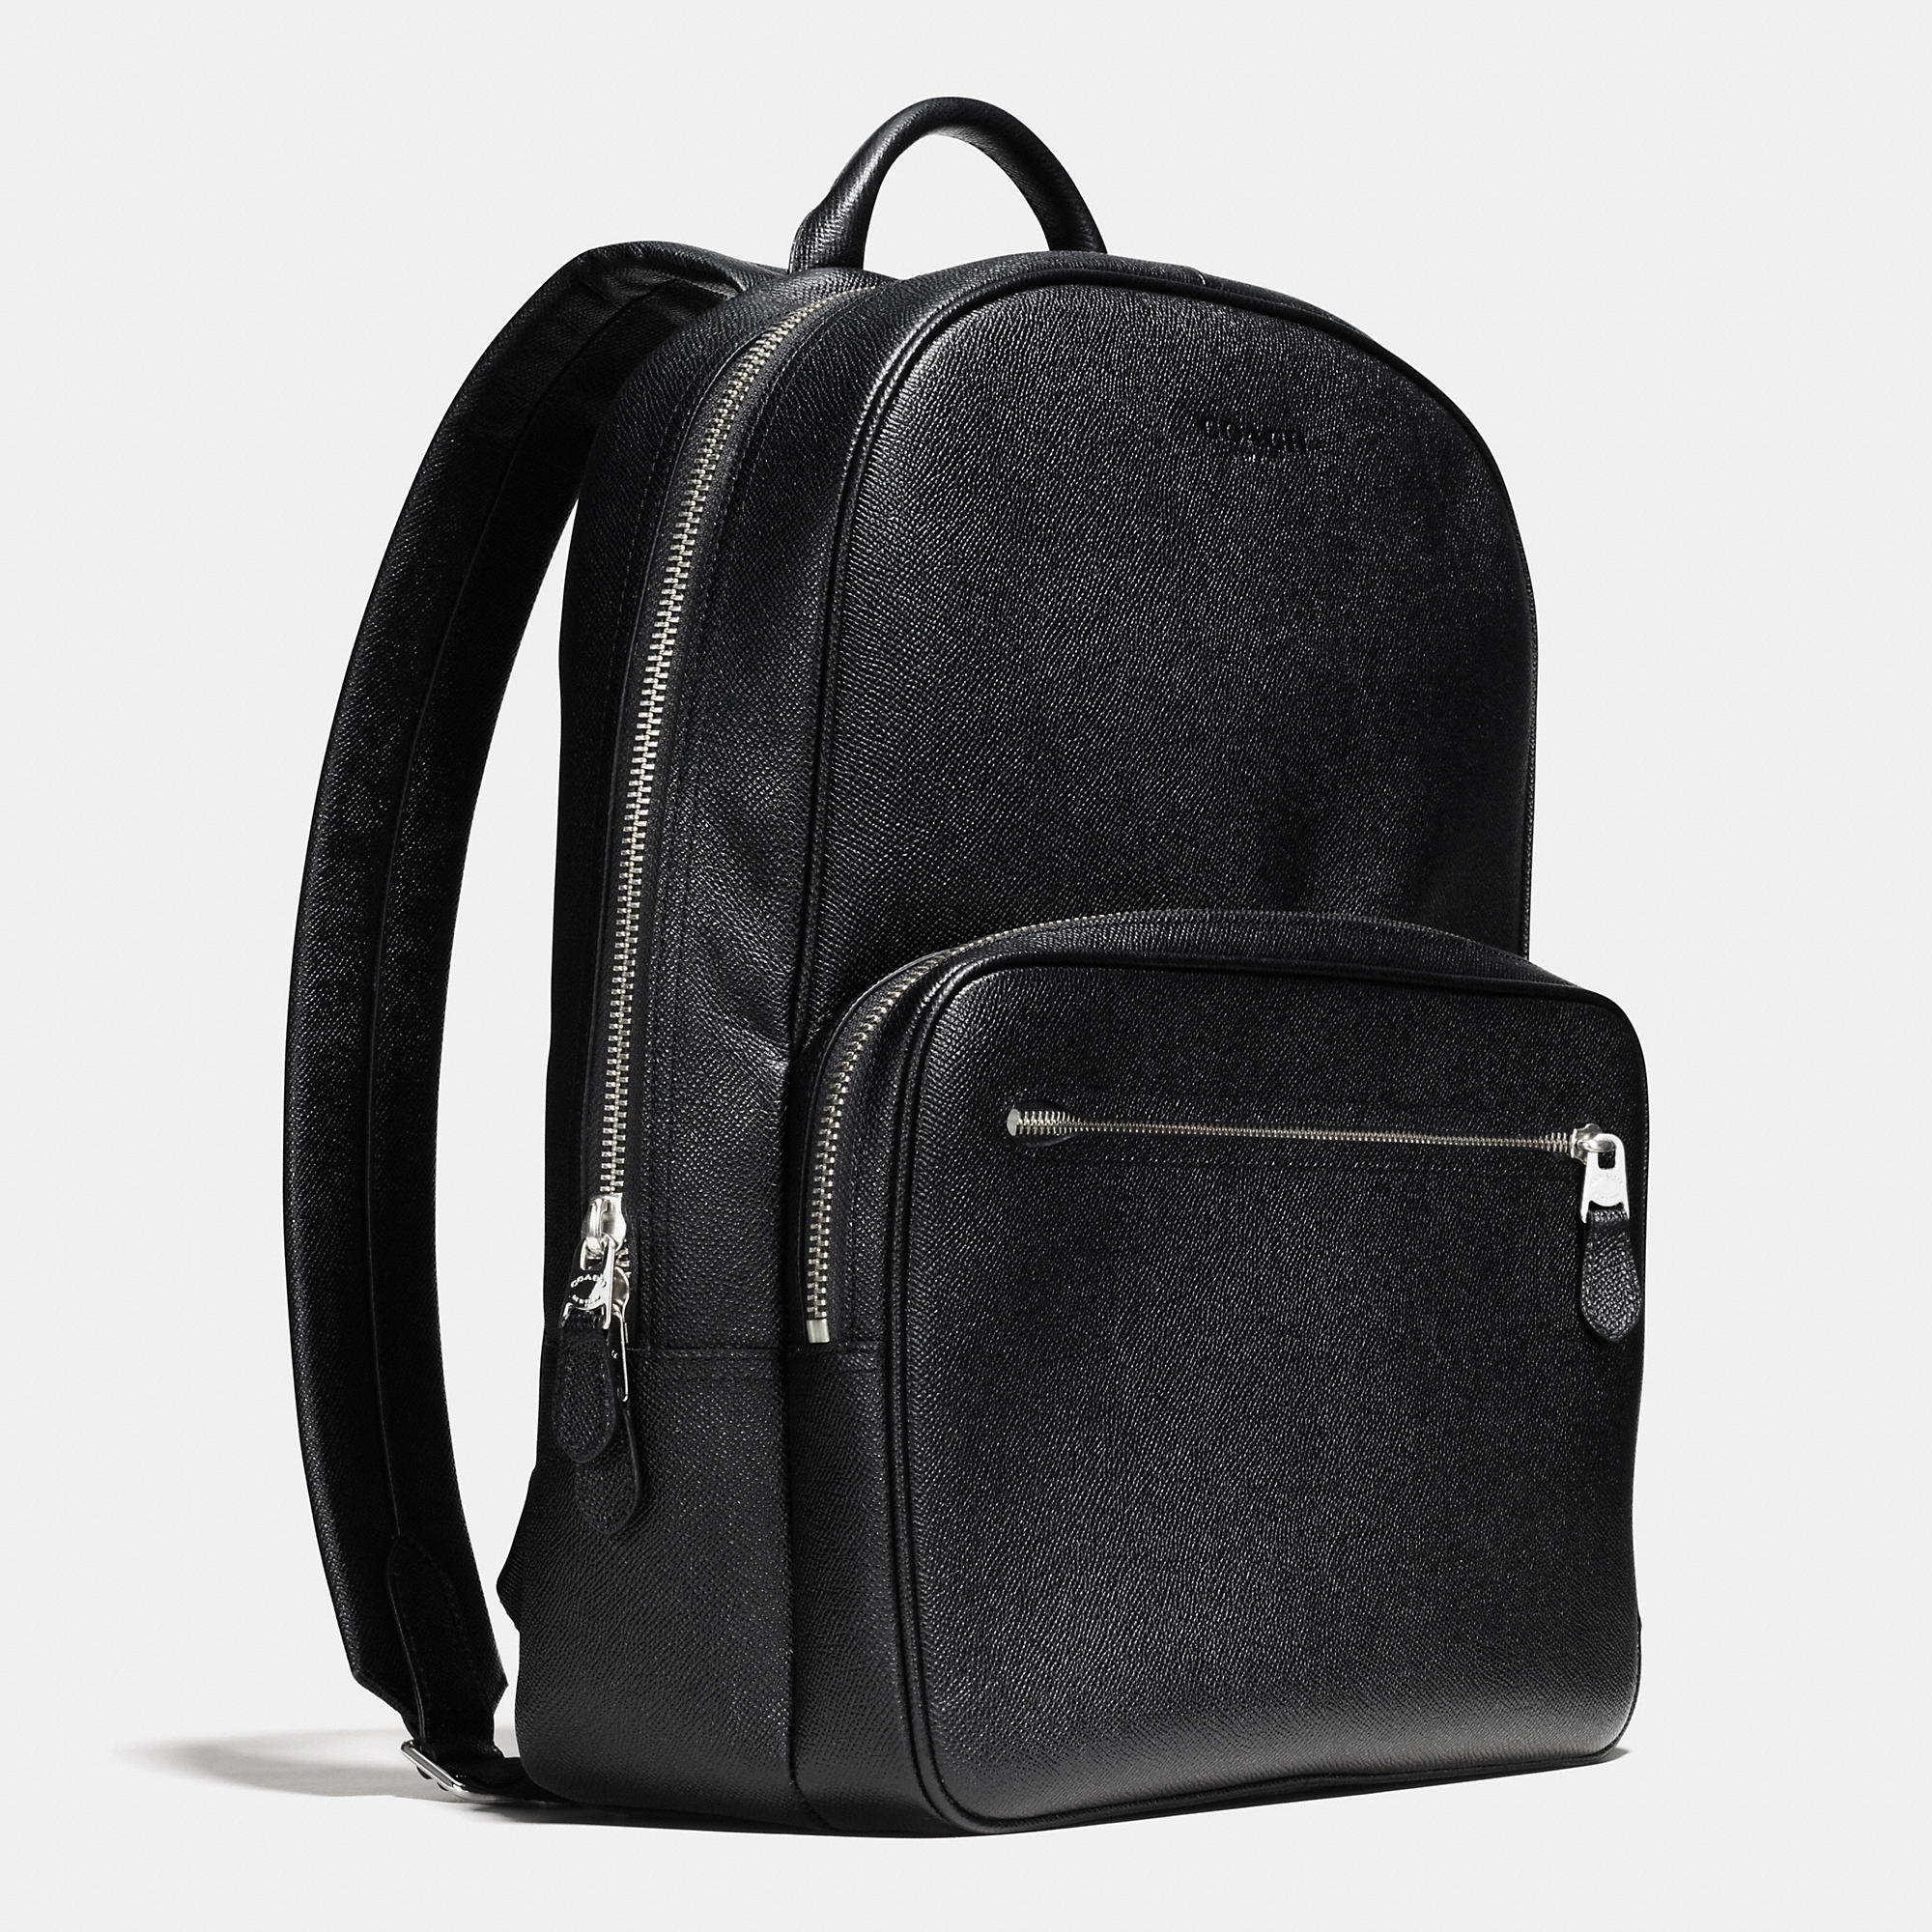 leather backpack men - DrBeckmann